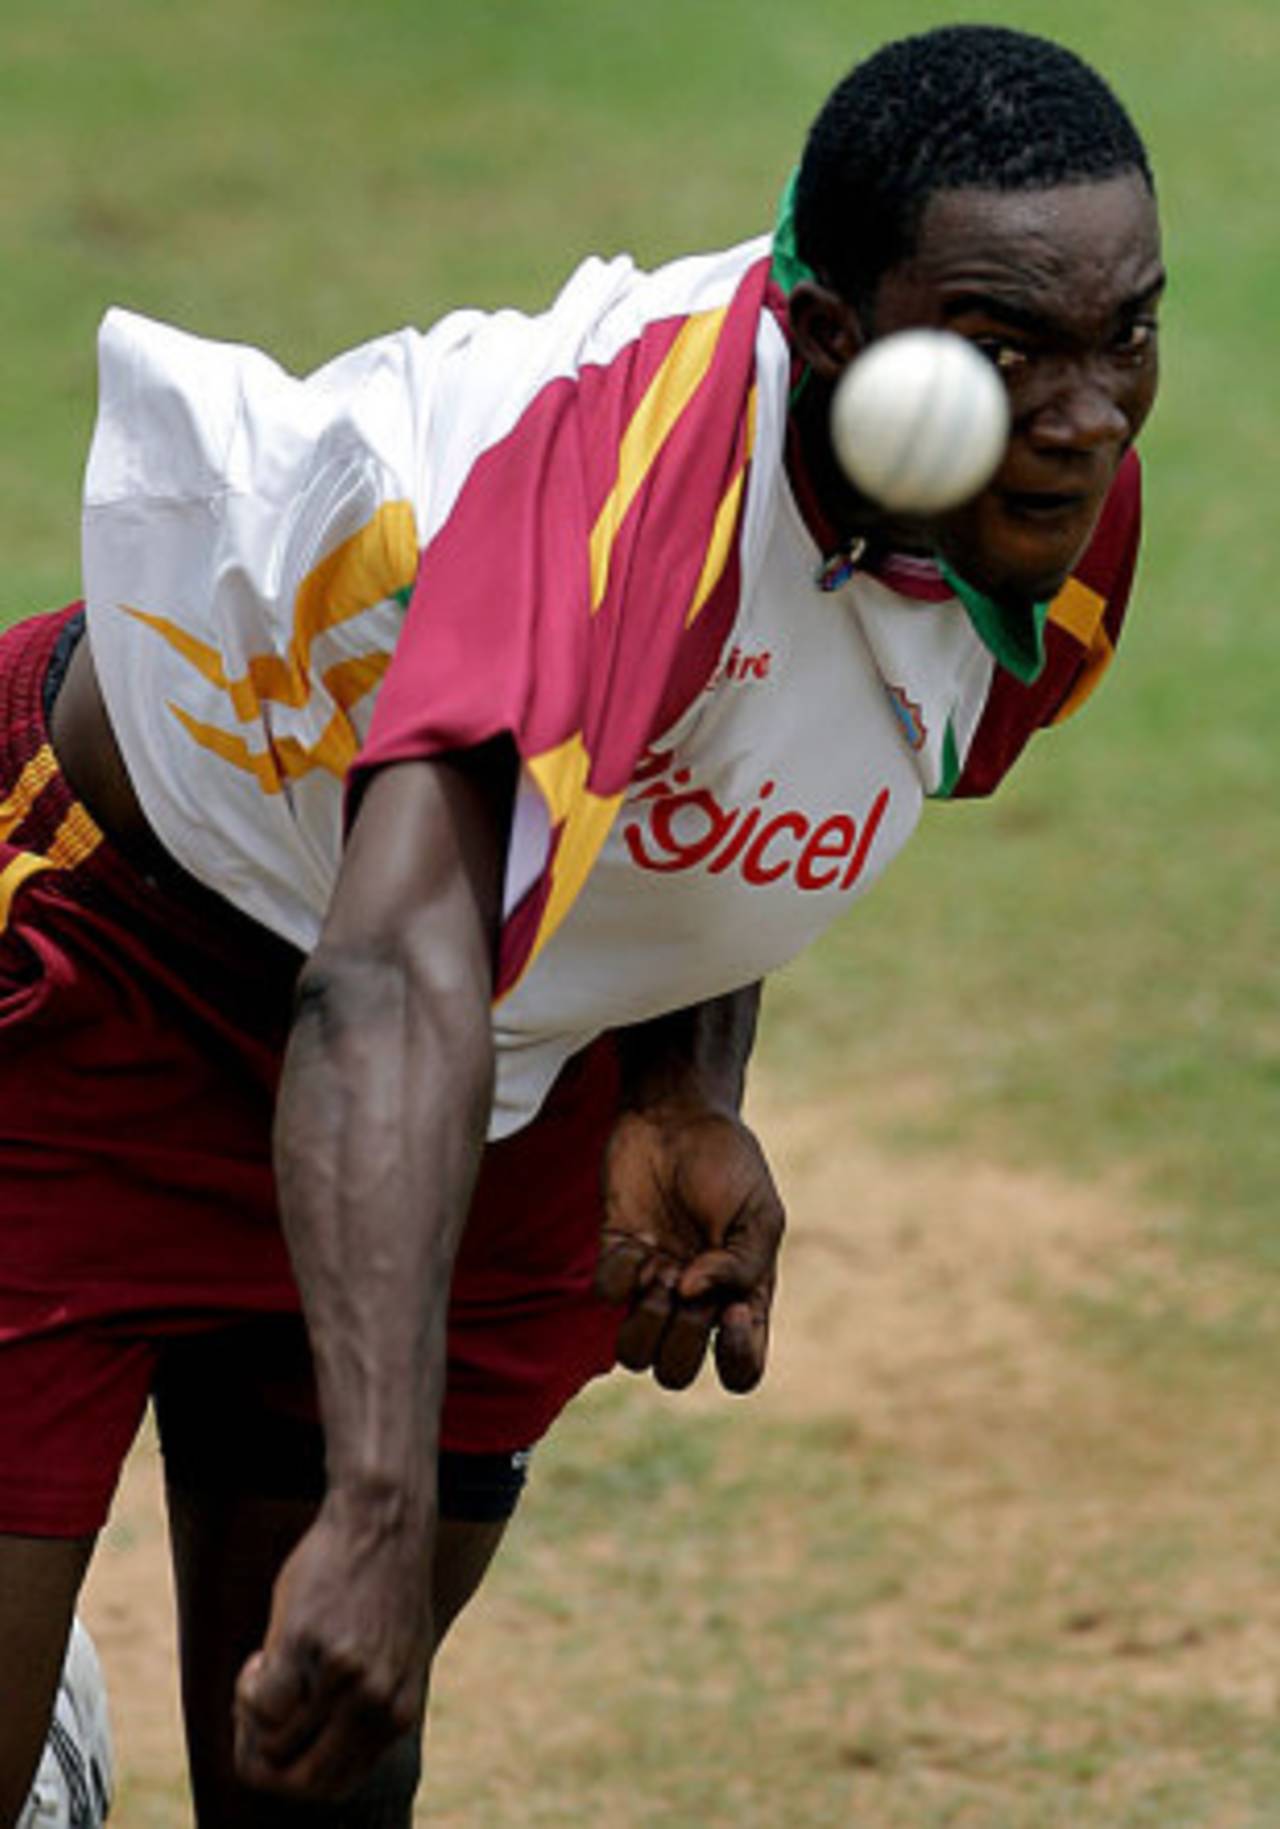 Jerome Taylor bends his back, St. Lucia, July 1, 2009